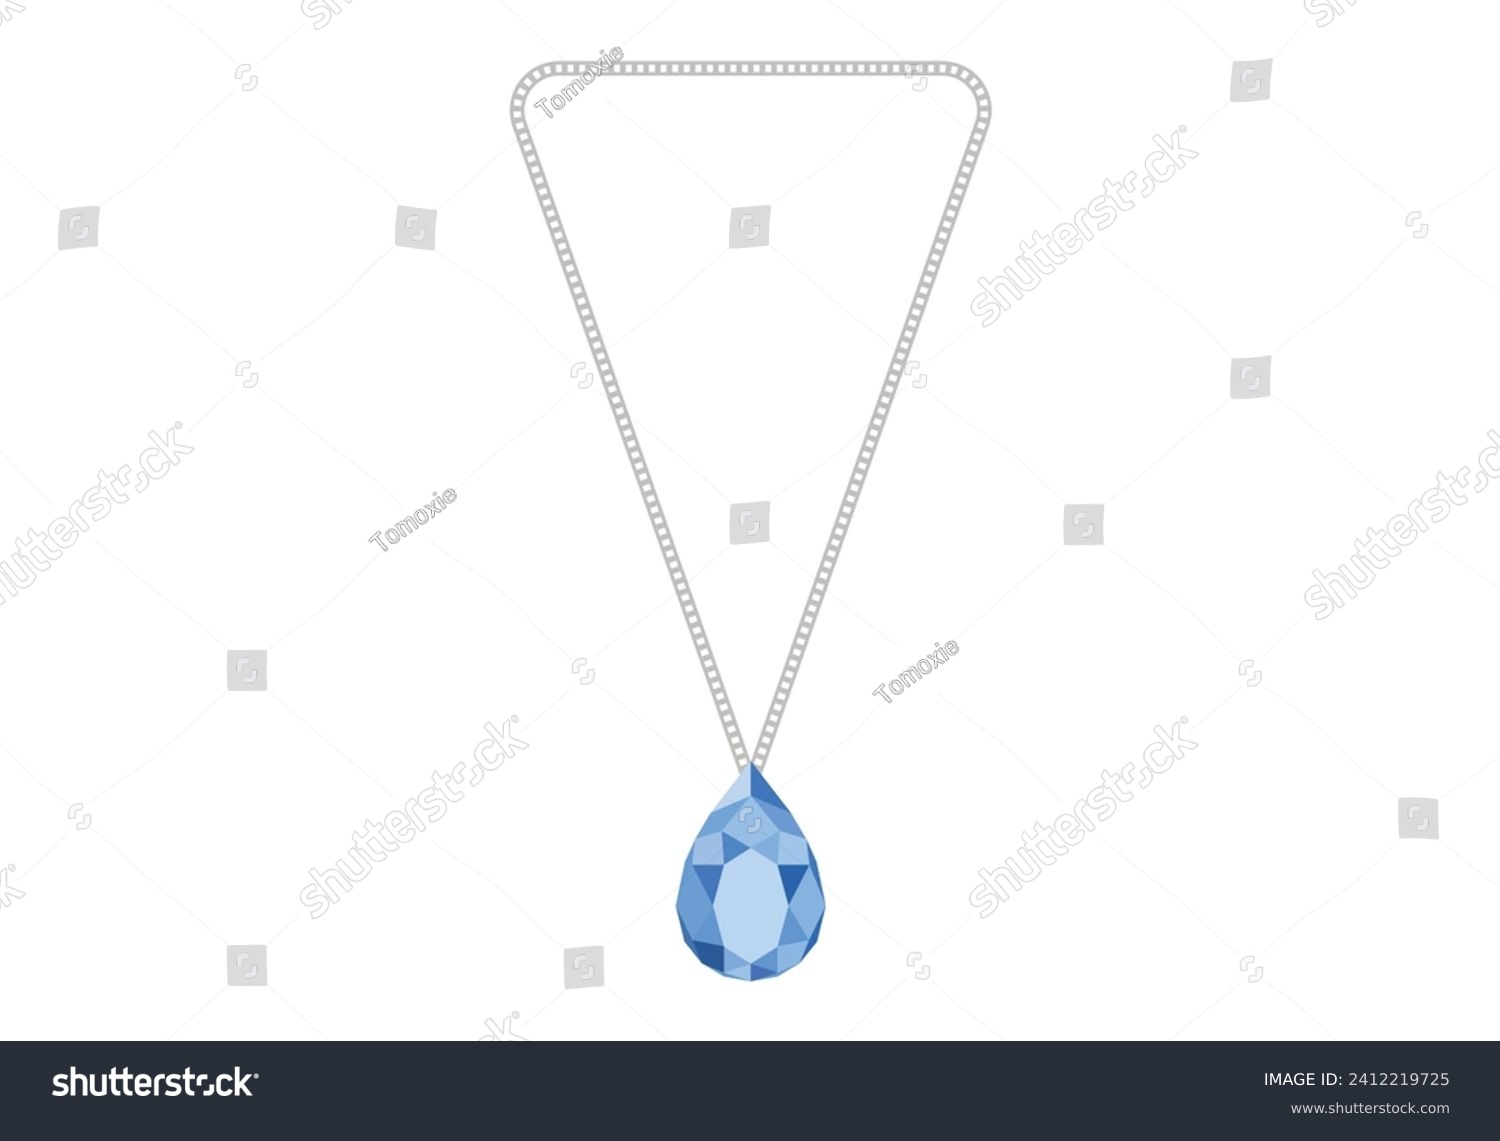 SVG of This is a vector topaz necklace illustration svg